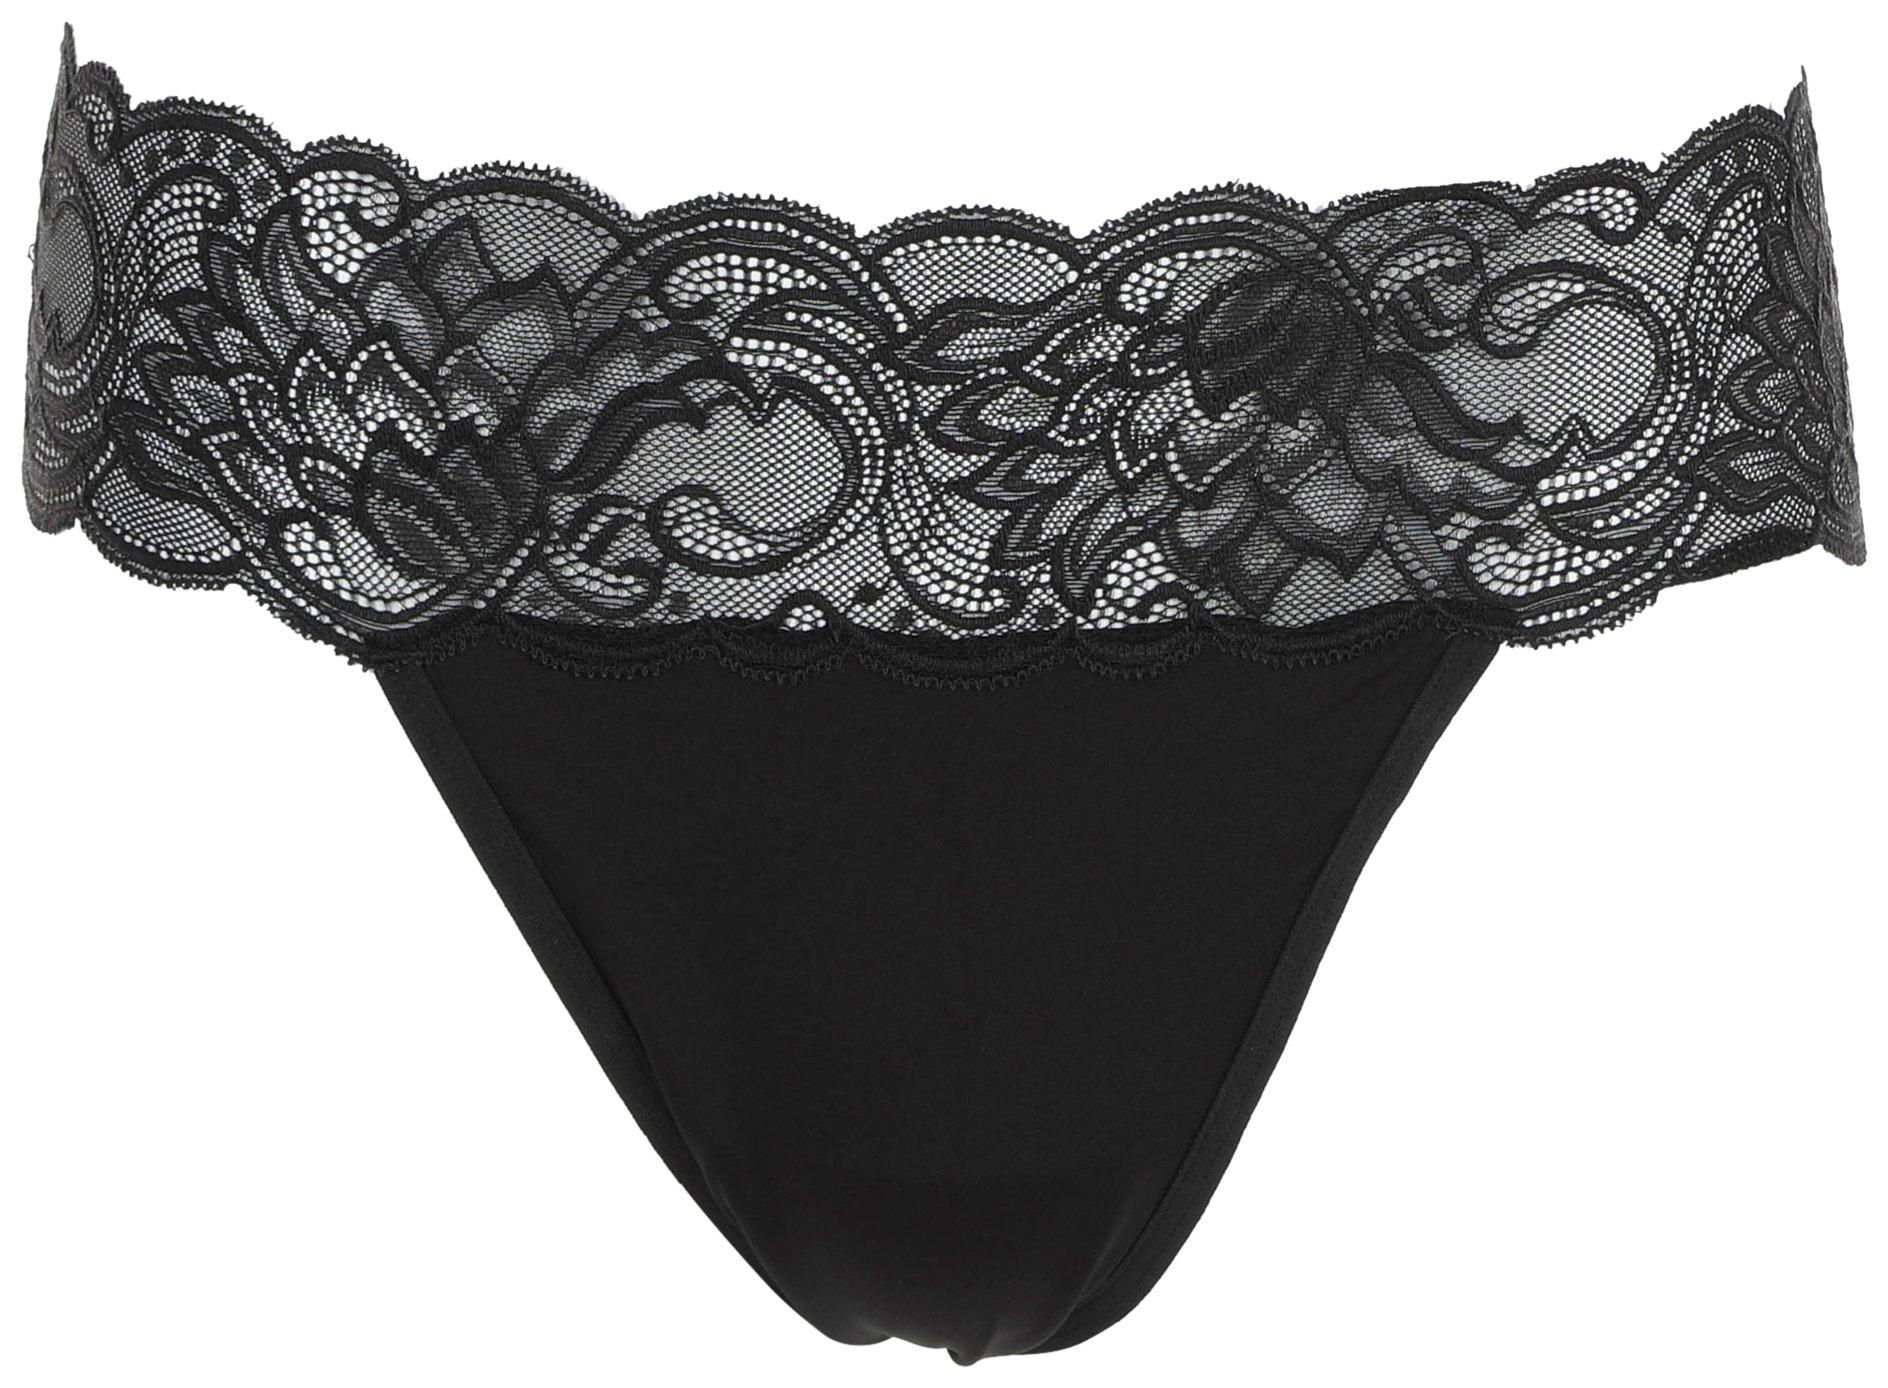 Maidenform Thong Size 8 - Black, 1 ct - Fred Meyer